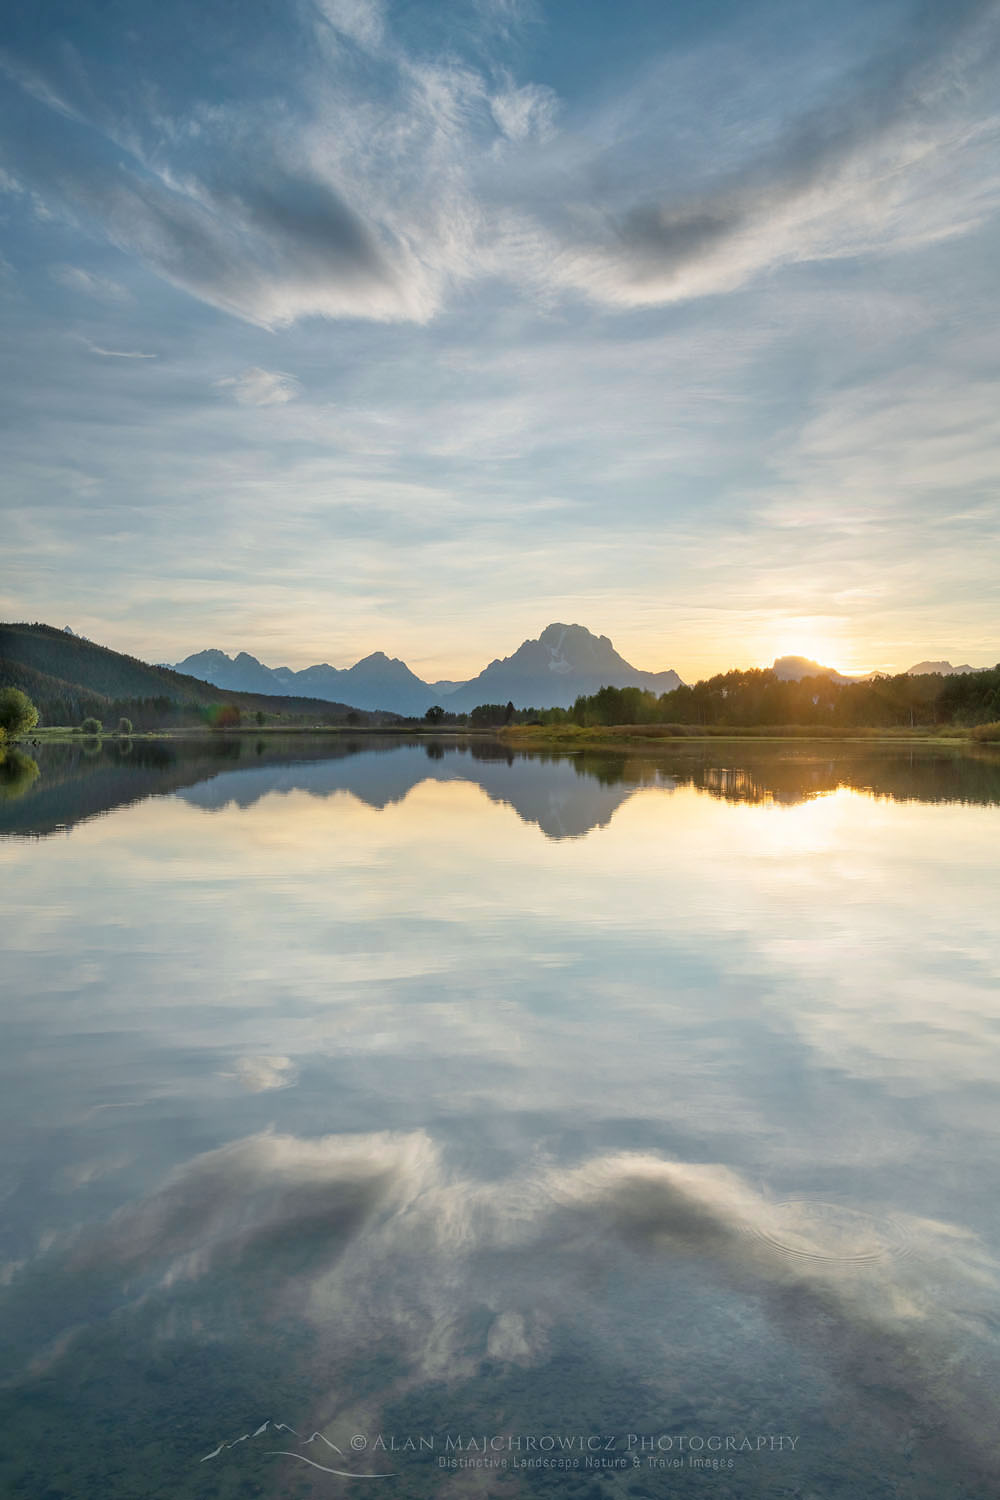 Sunset clouds reflected in still waters of the Snake River at Oxbow Bend, Grand Teton National Park Wyoming #67534